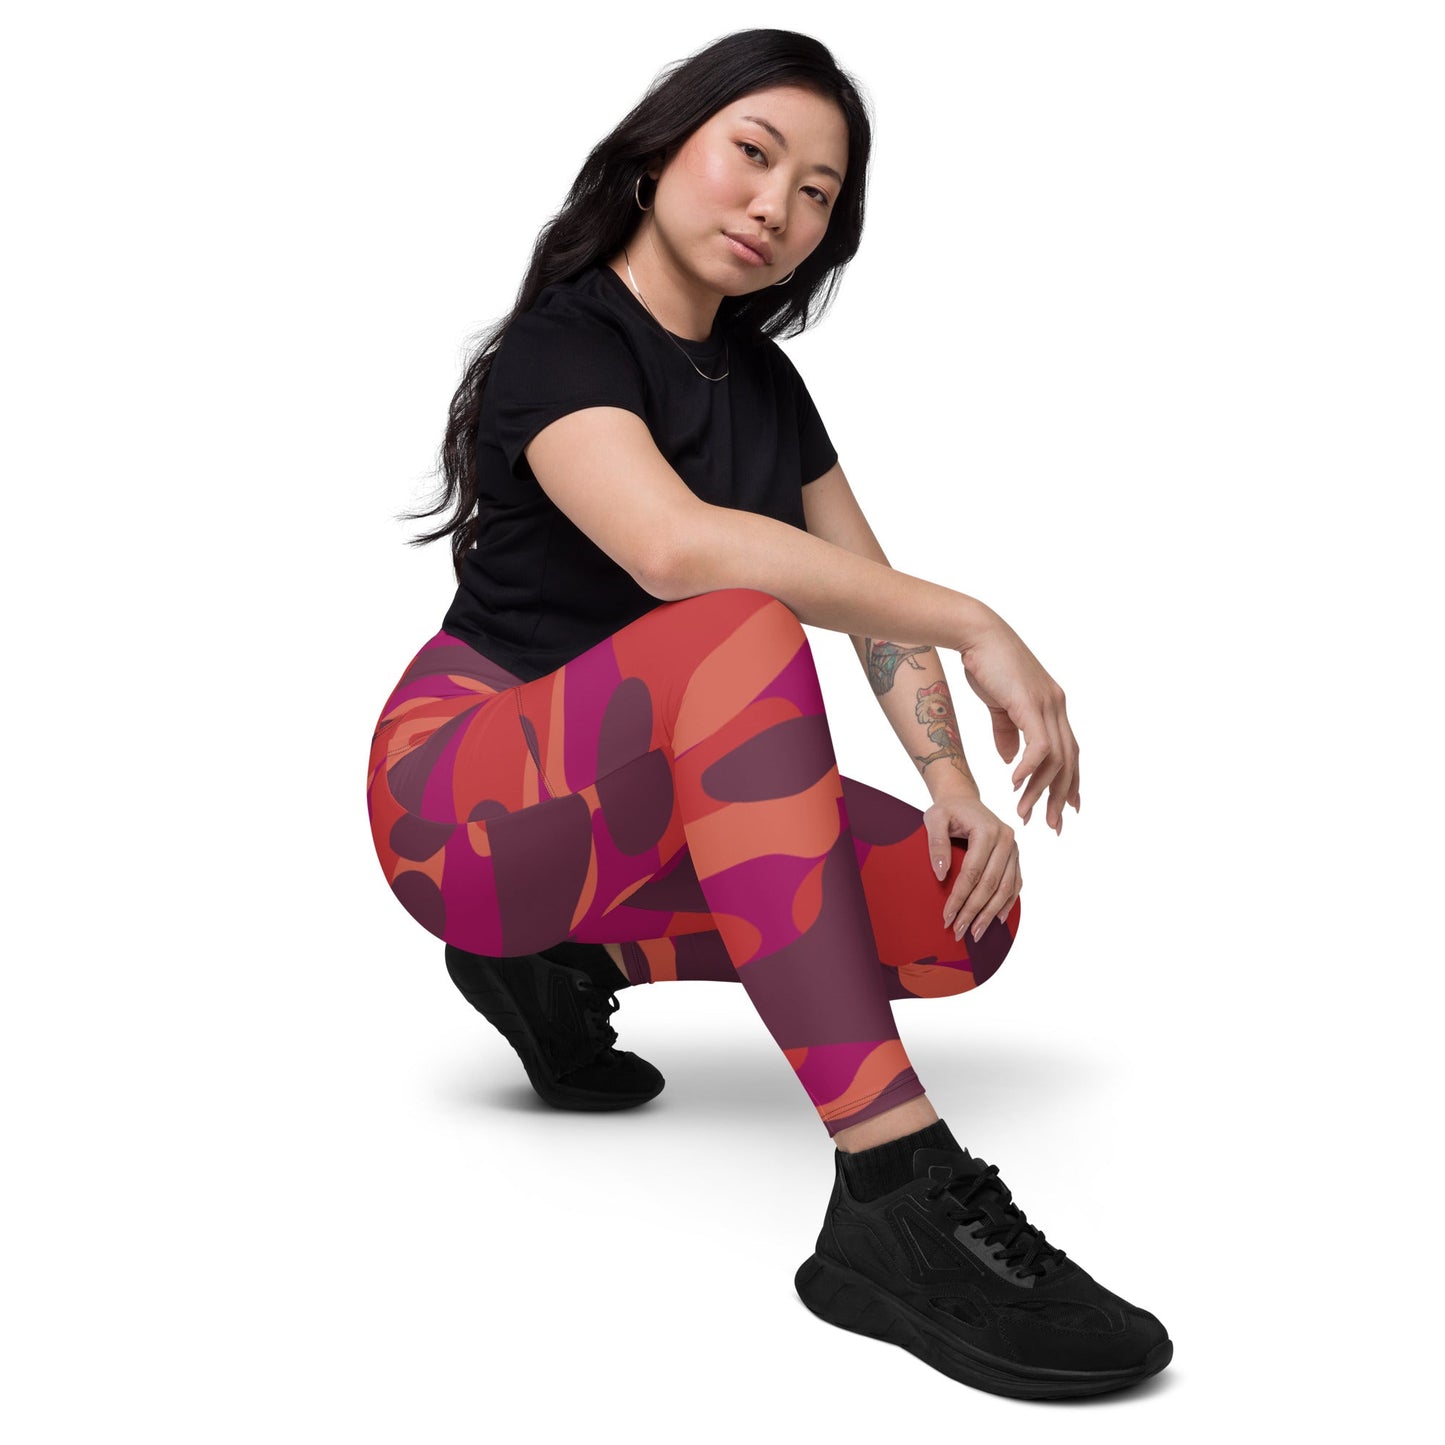 Camo leggings with pockets - Sport Finesse